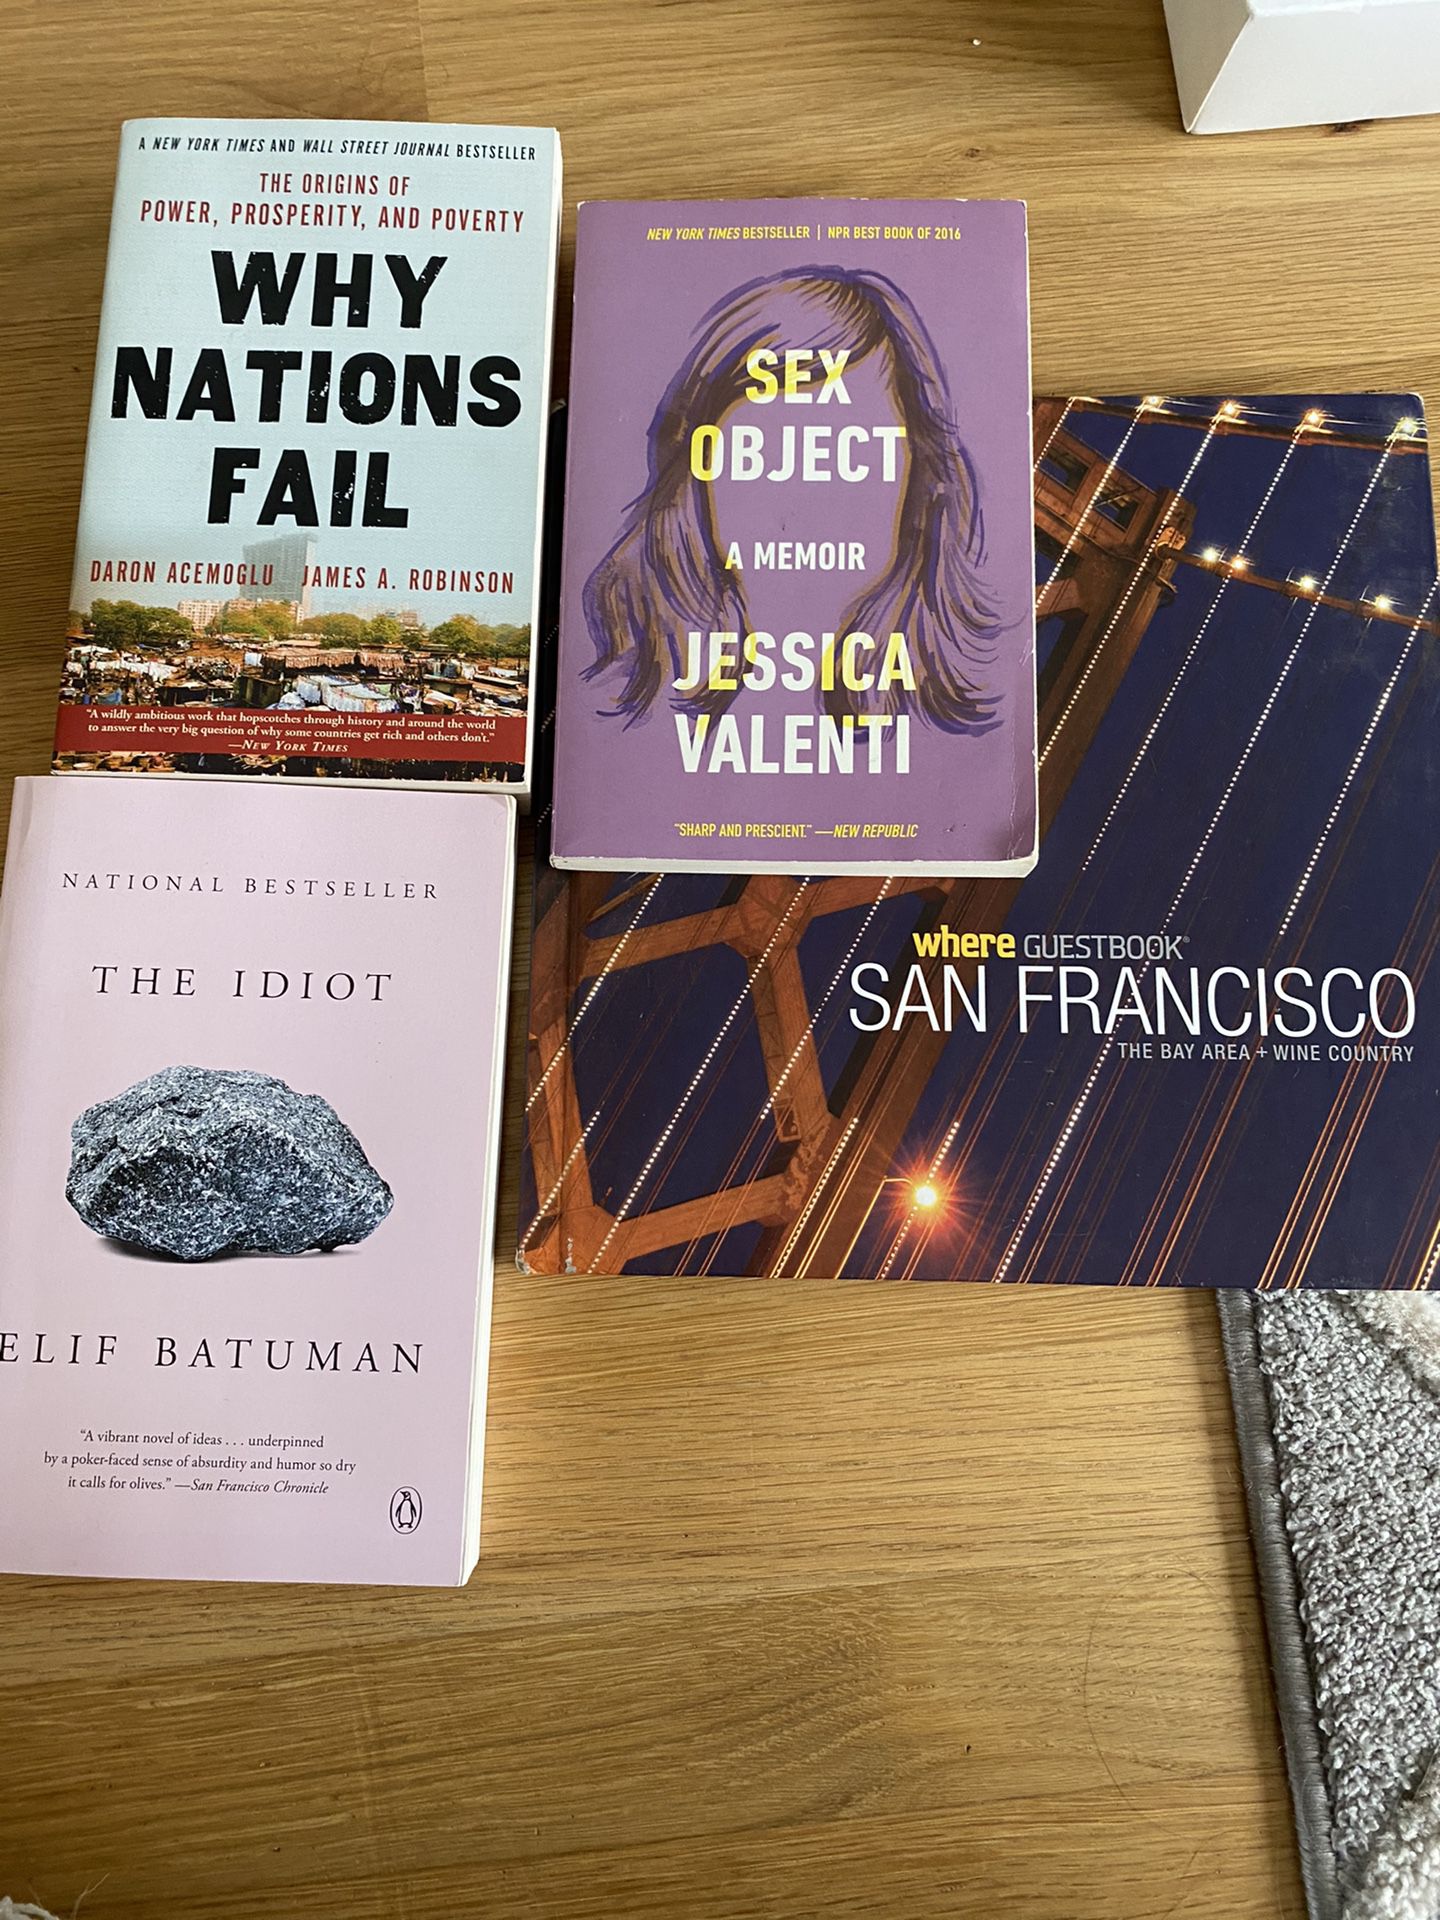 Why nations fail, The Idiot, Where Guestbook San Francisco, Sex Object